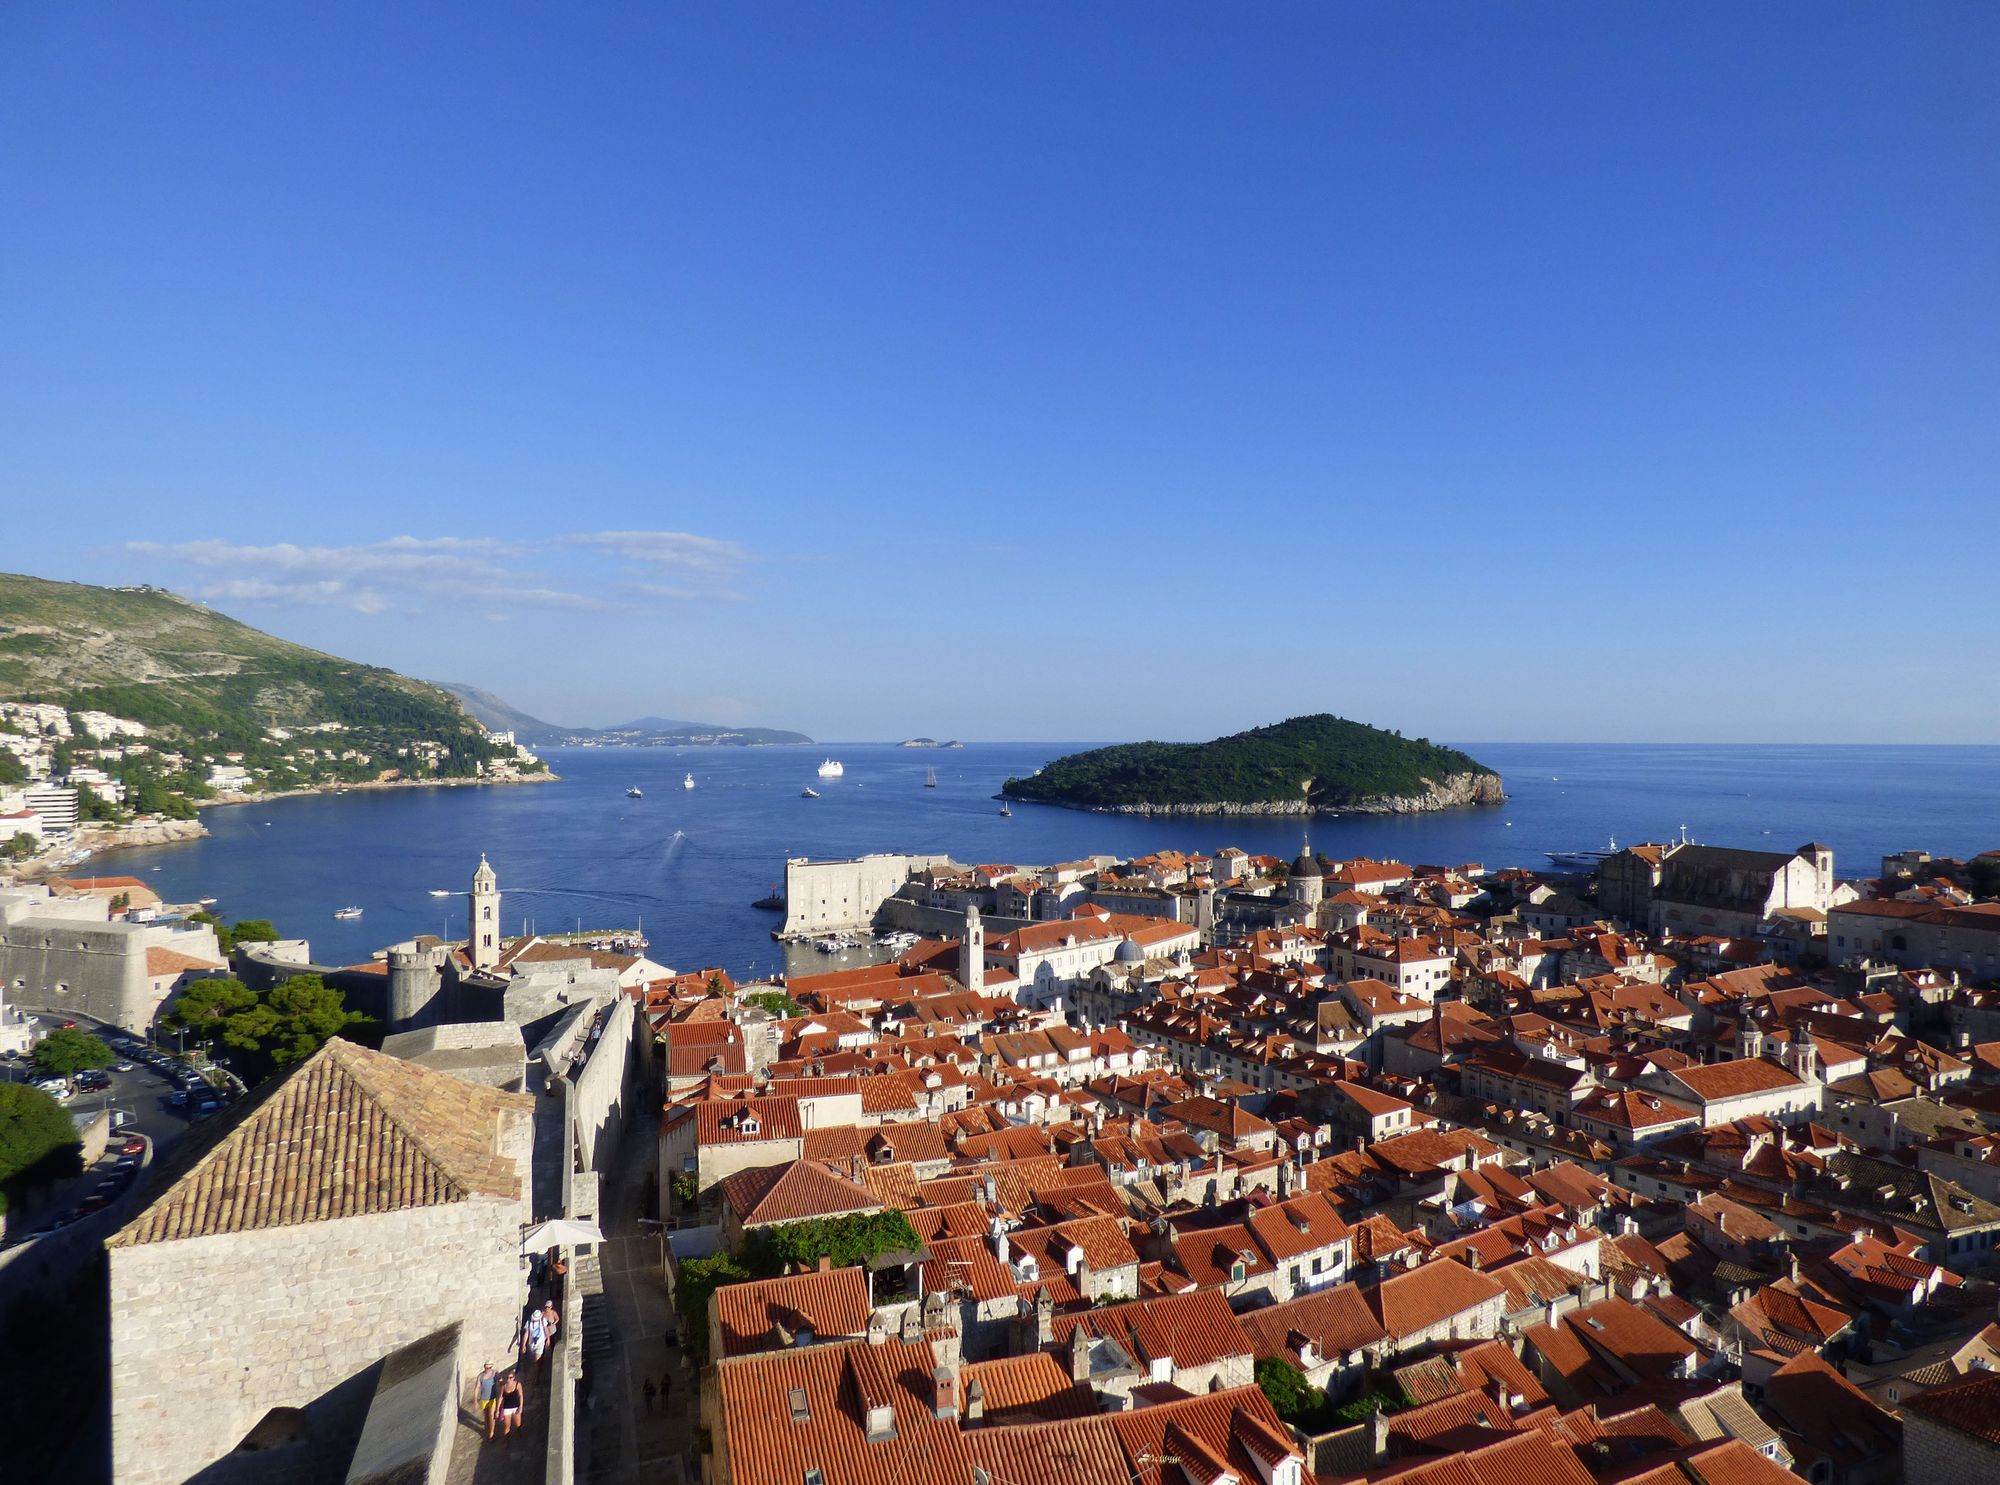 Dubrovnik: War and peace